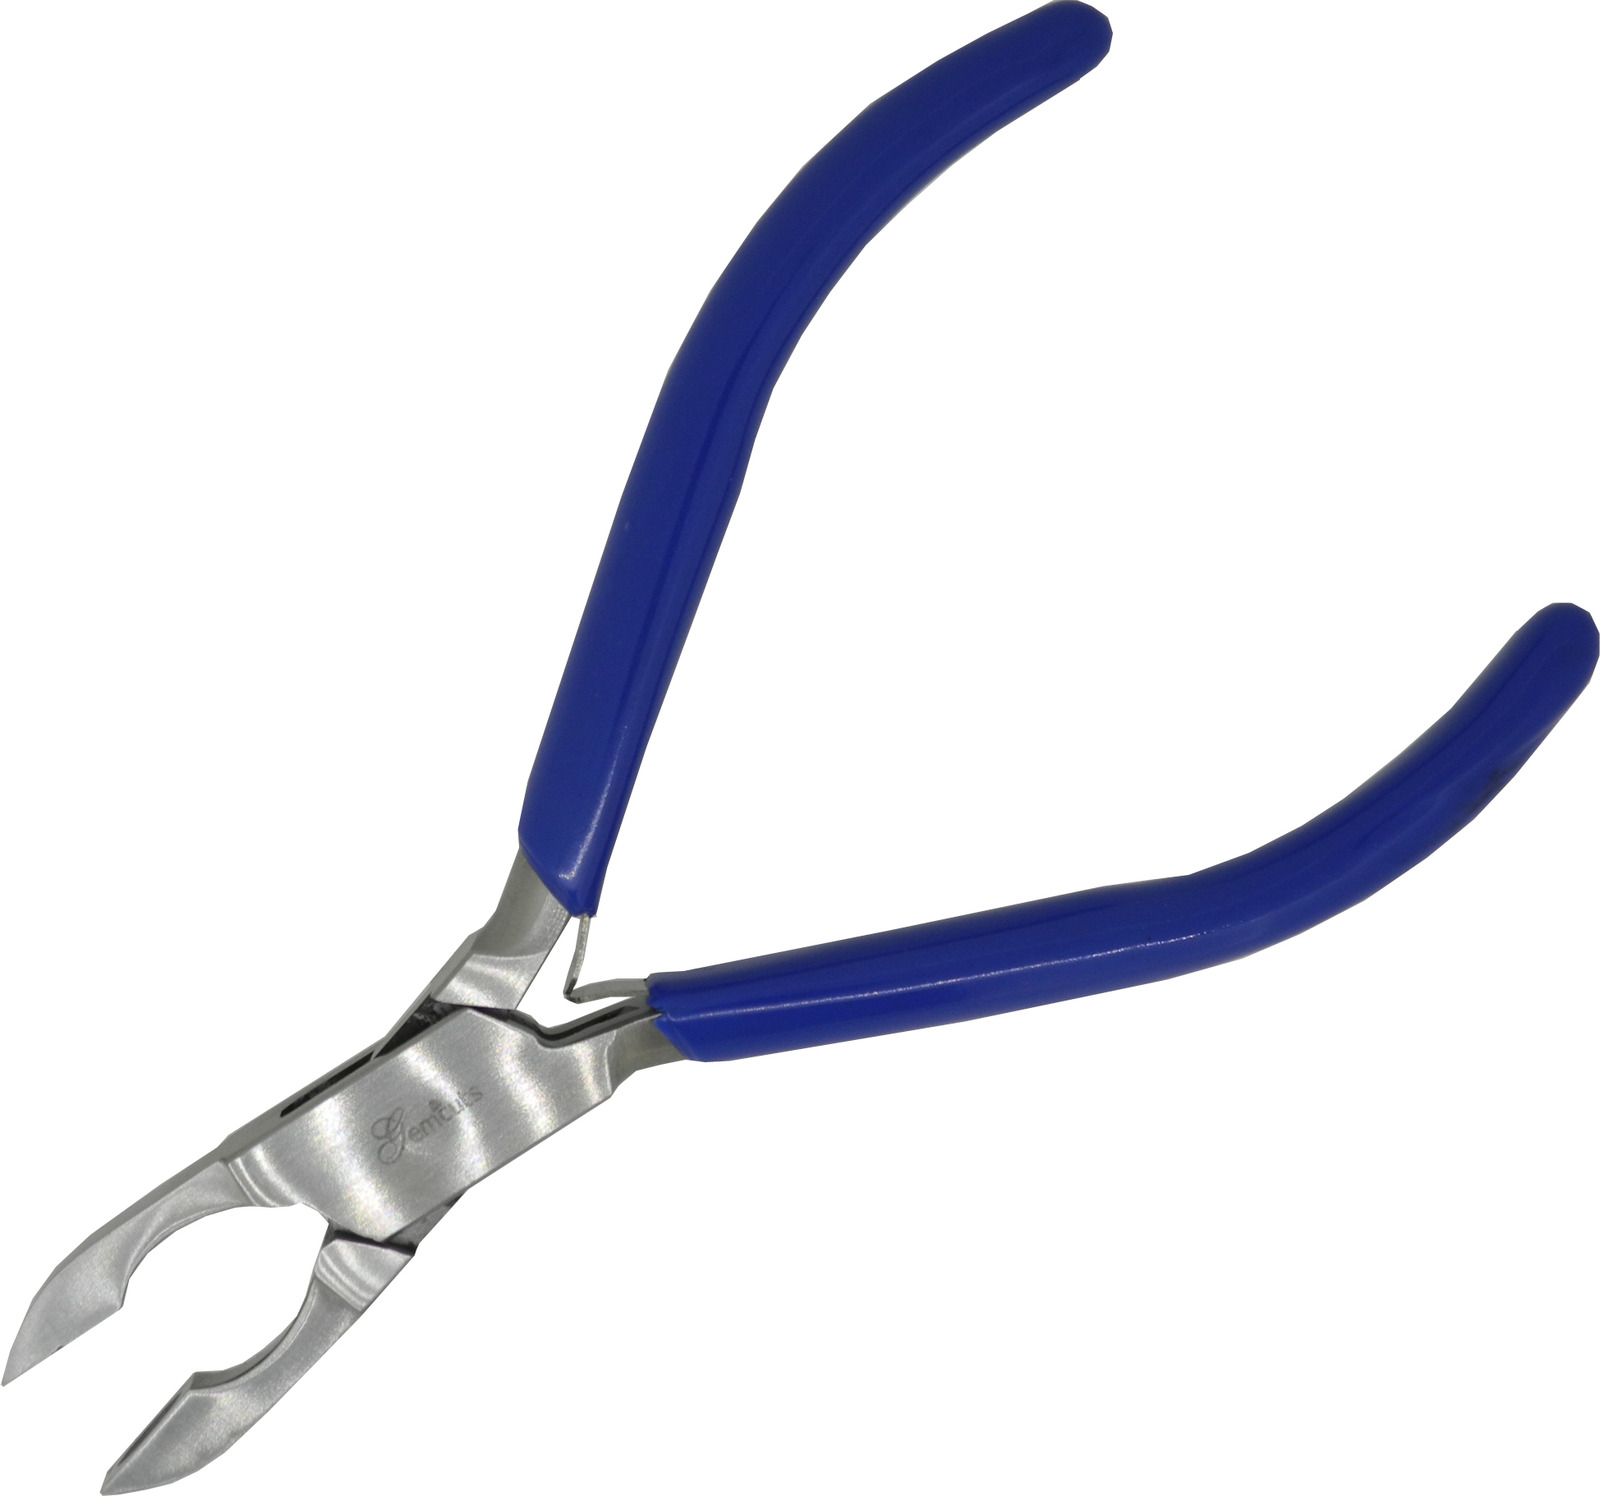 Perfect Pliers for Closing Loops and Jumprings without Scratching or Distorting